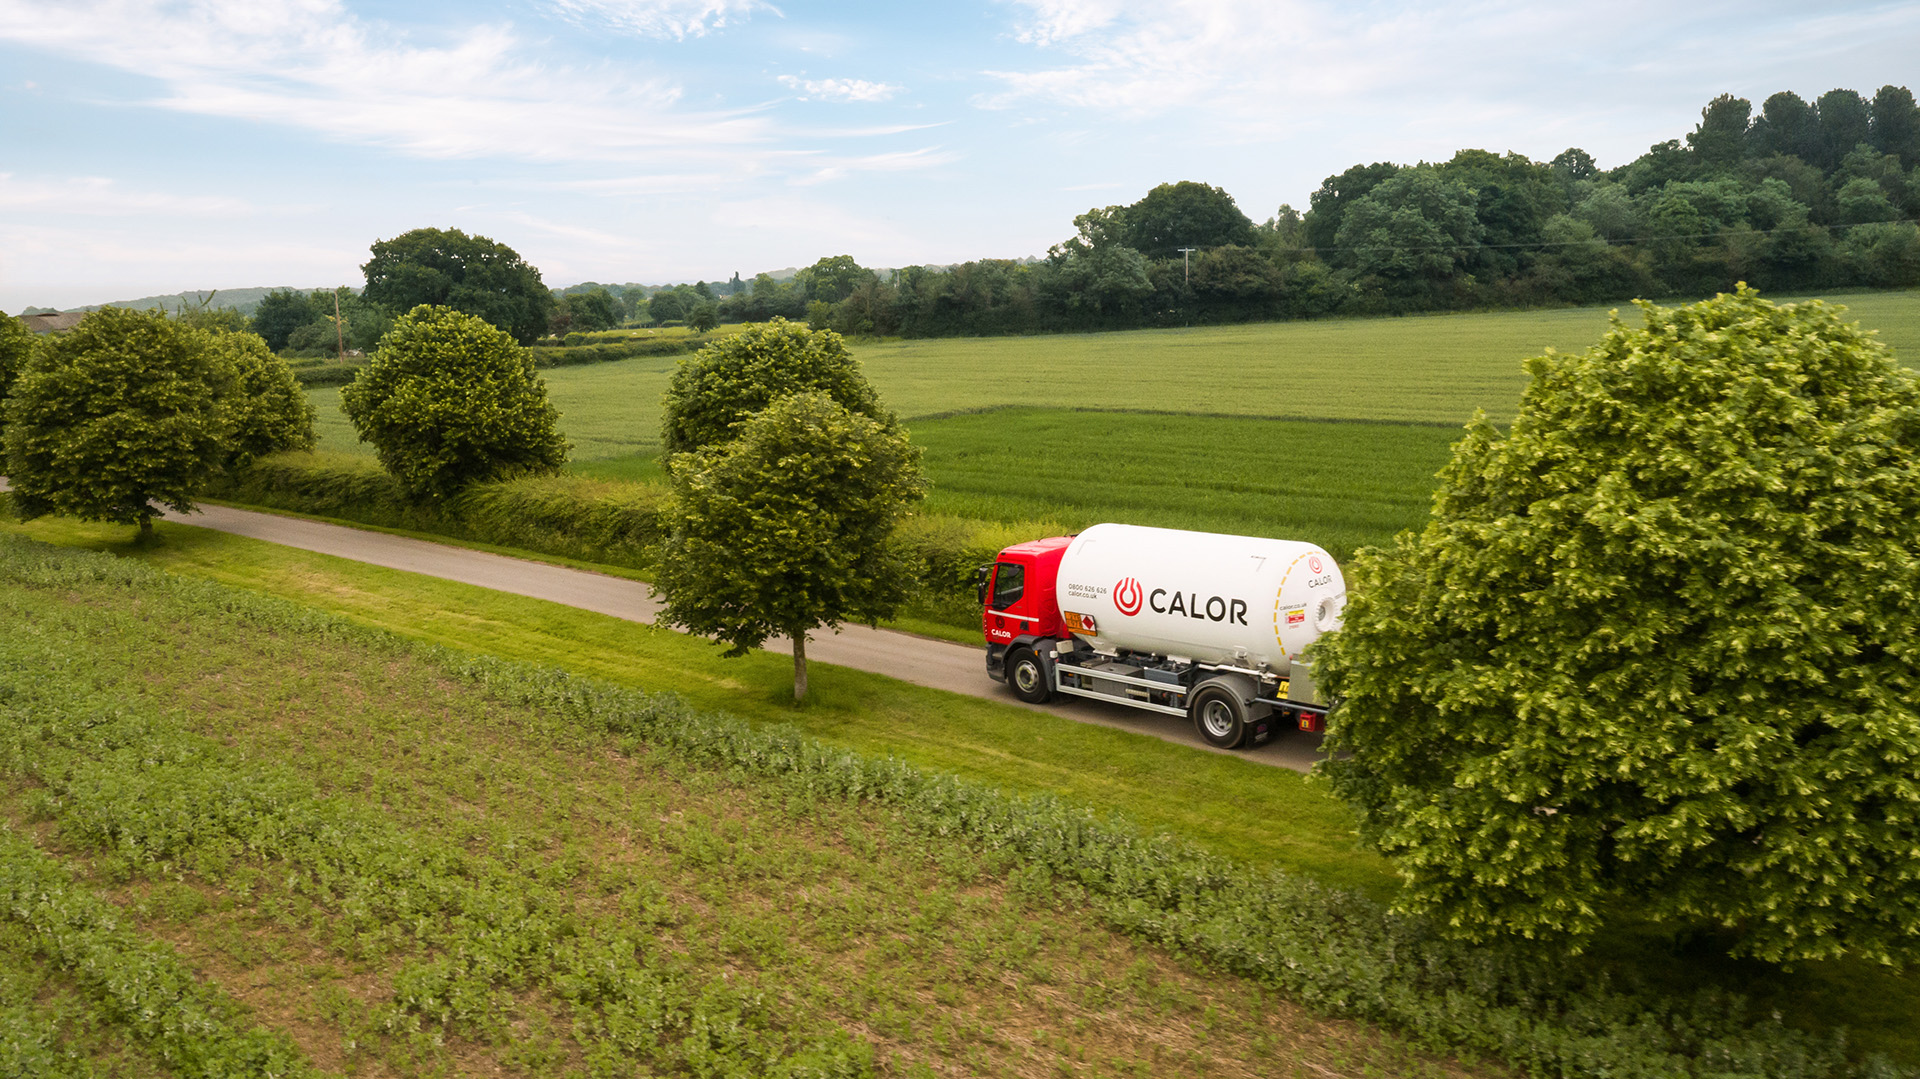 A Calor lorry driving in between green meadows in the countryside